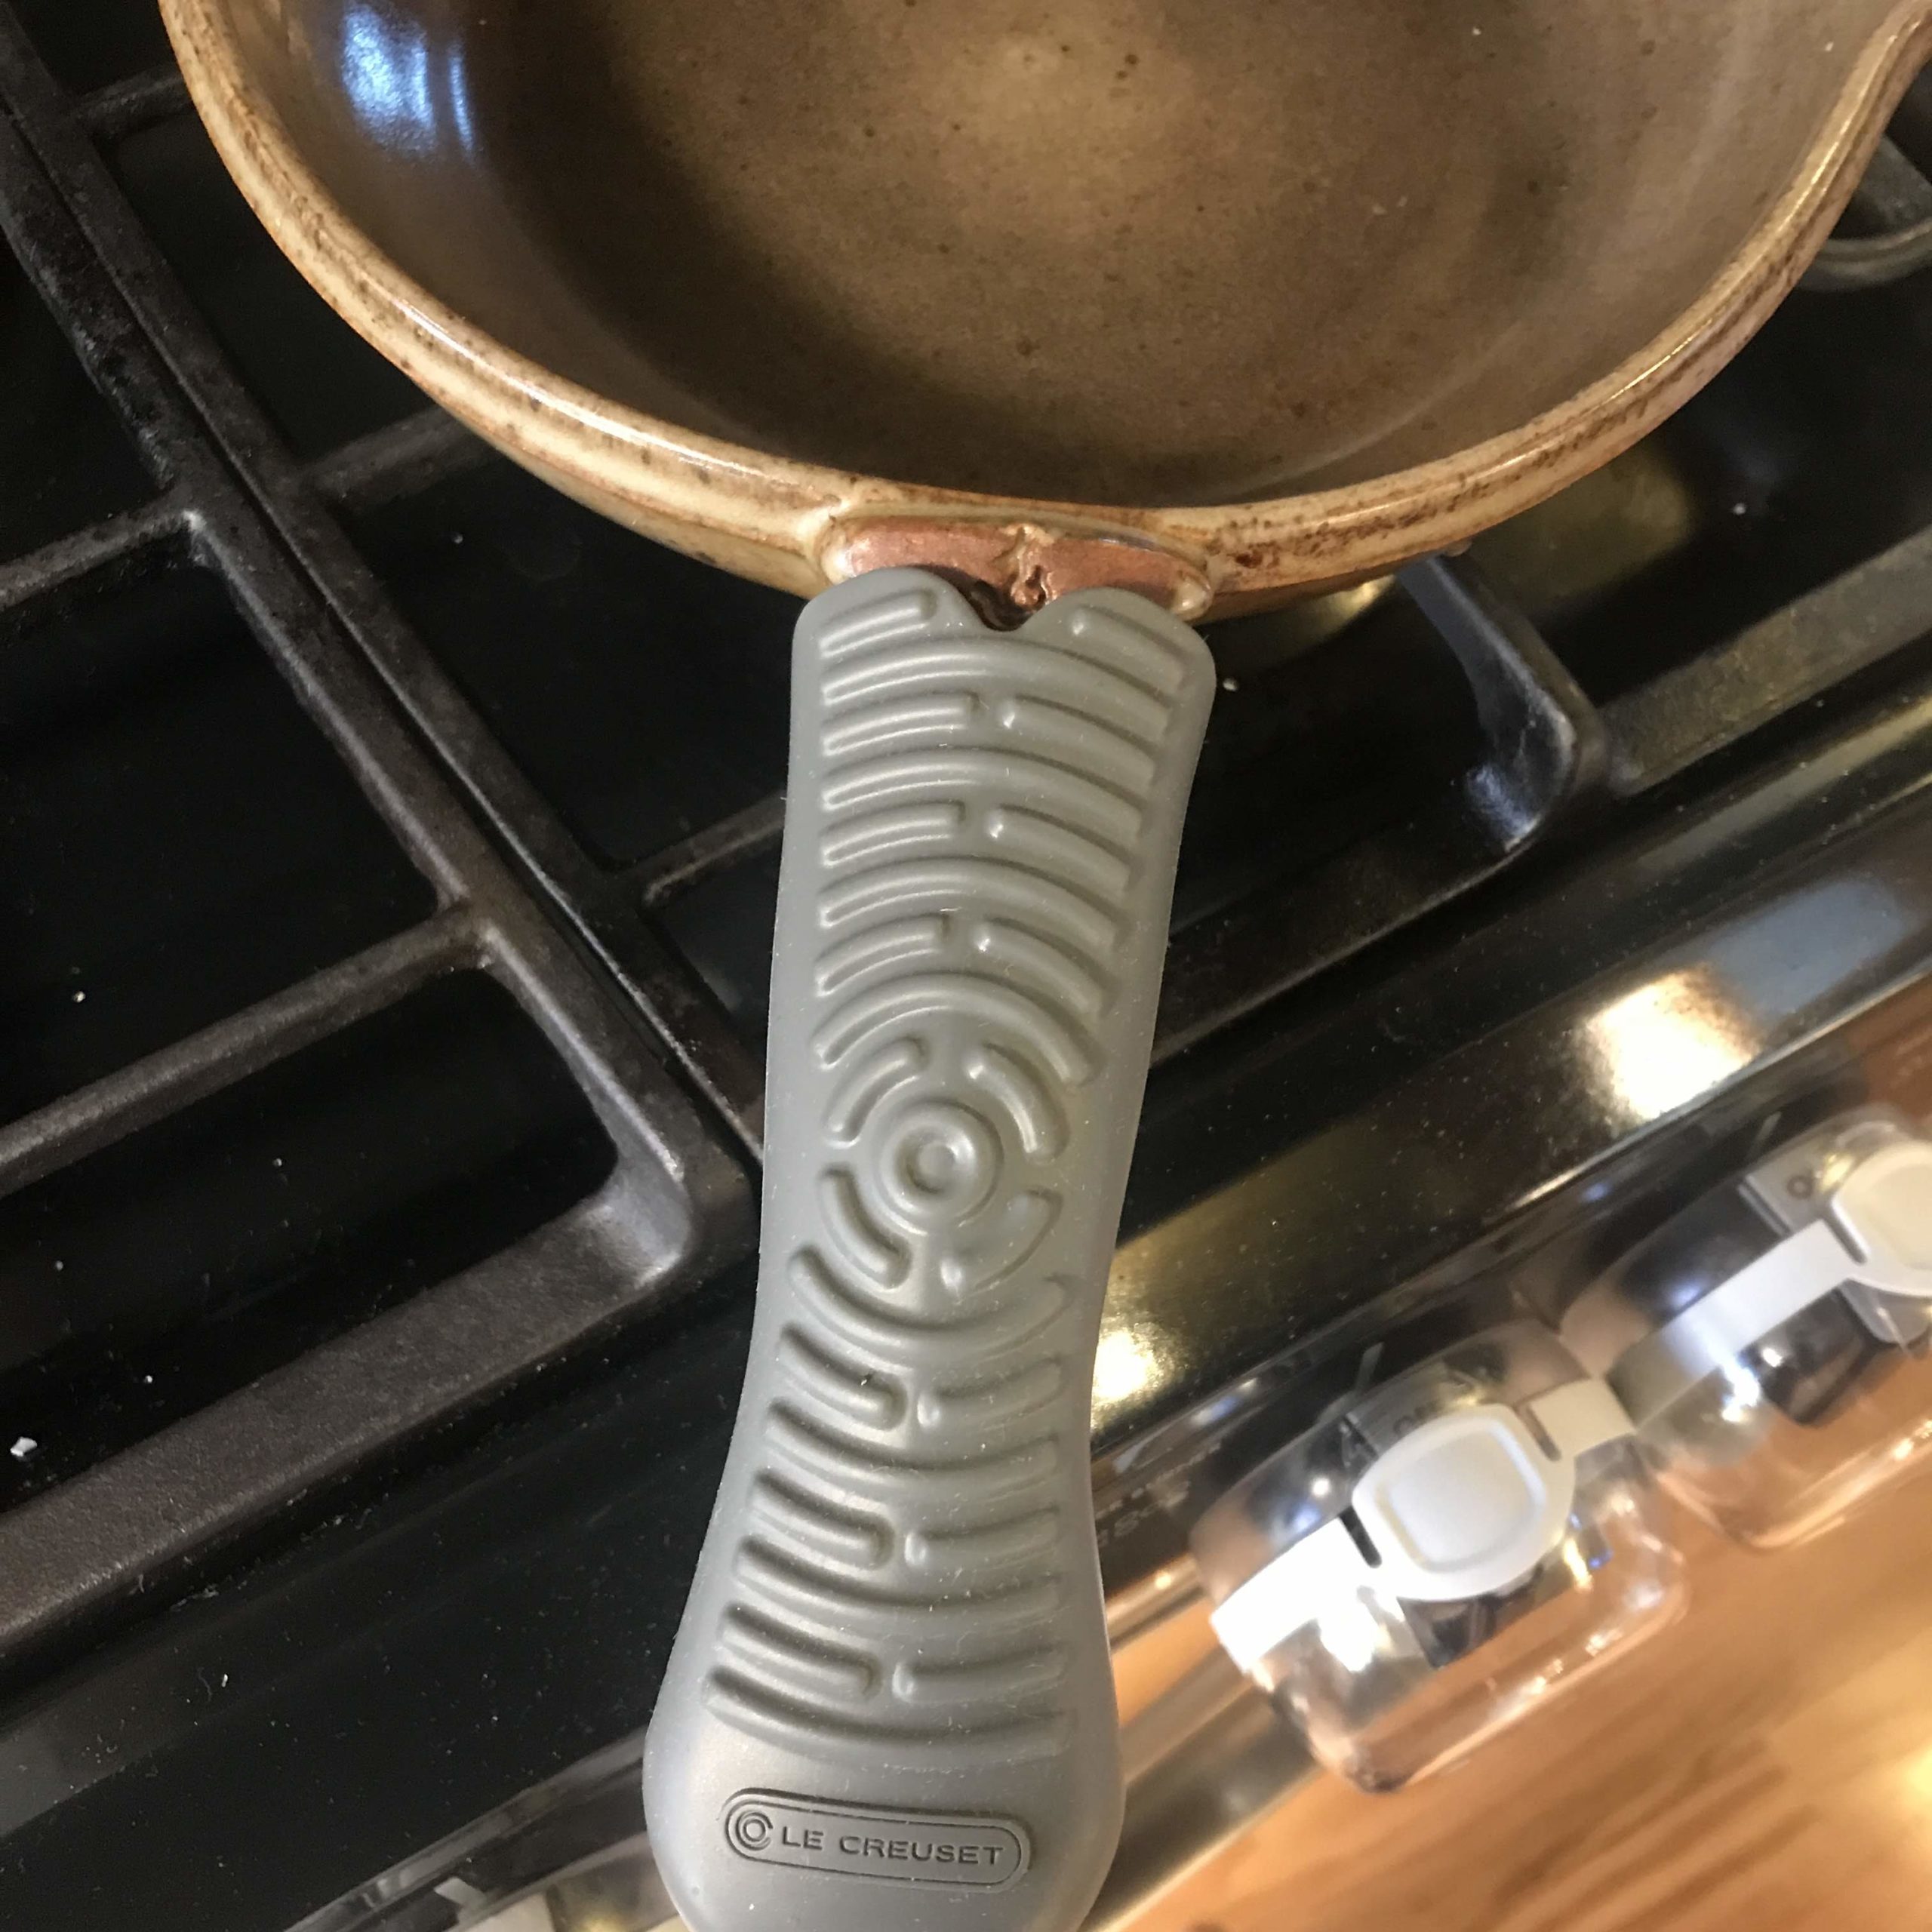 Le Creuset Silicone Cool Tool Handle Sleeve on our flameware small skillet